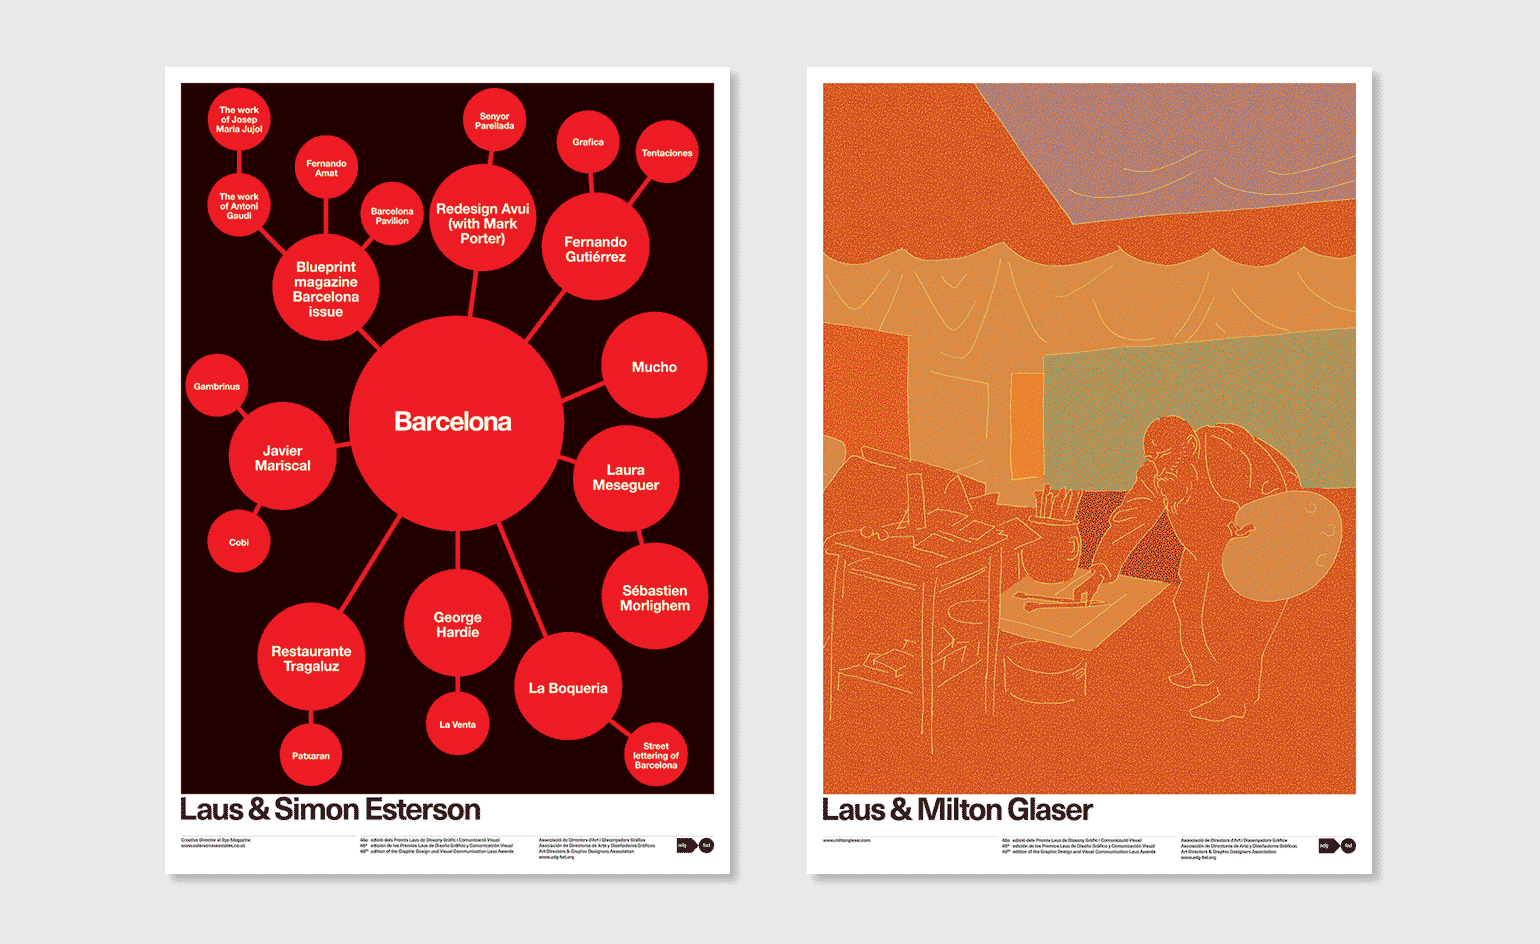 Left: poster of design icons and visual inspirations associated with Barcelona Right: drawing of an elderly painter at work in his studio, rendered in a cheerful orange